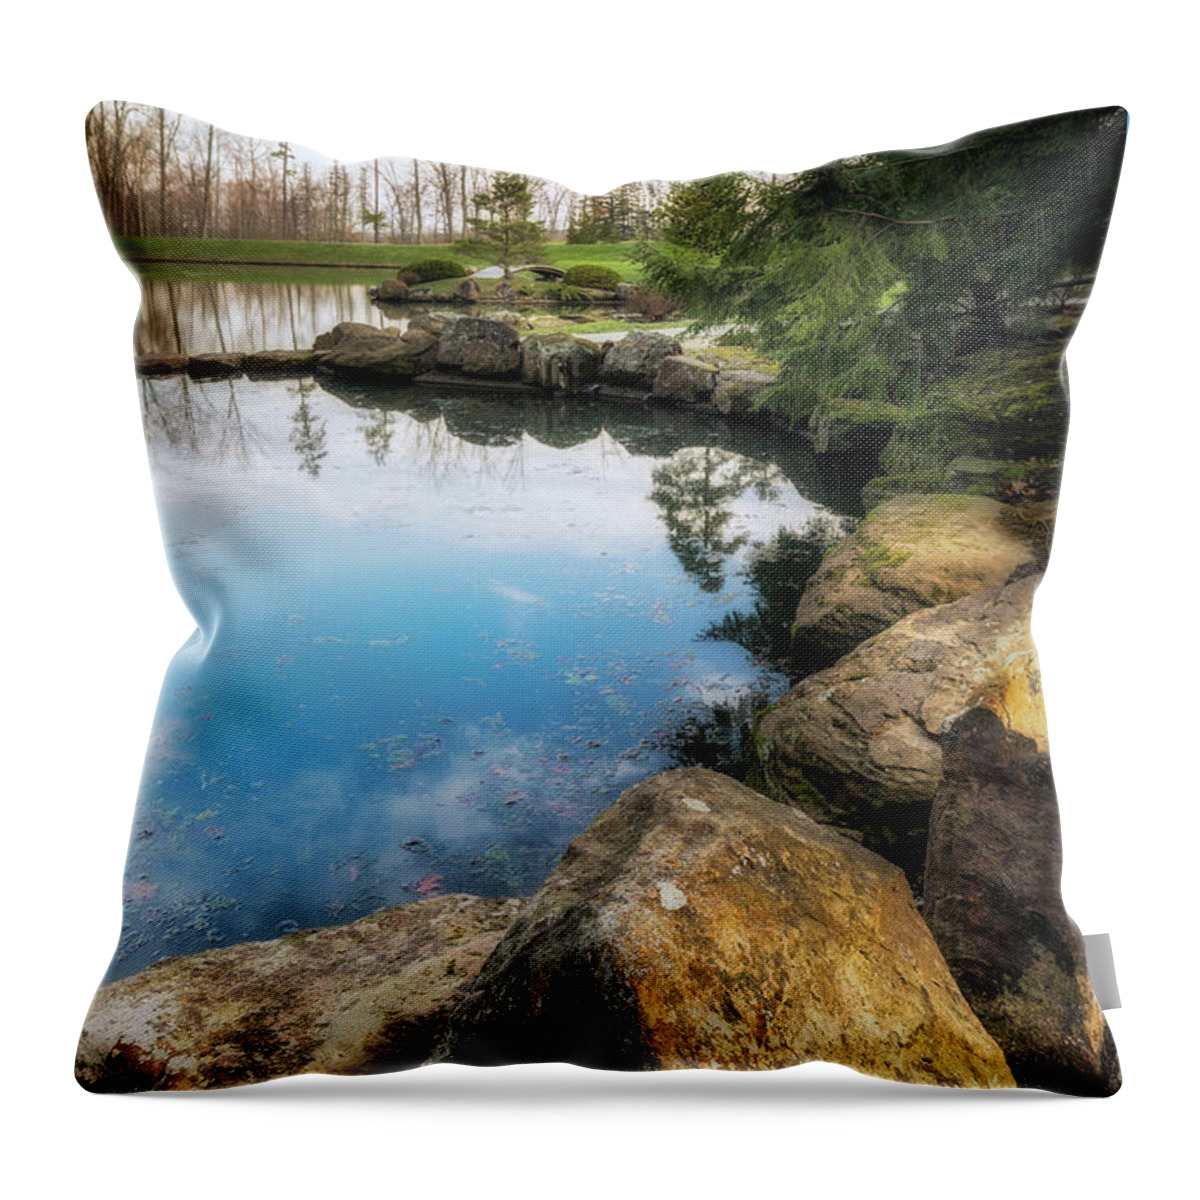 Landscape Throw Pillow featuring the photograph Rock Lined Pond by Tom Mc Nemar